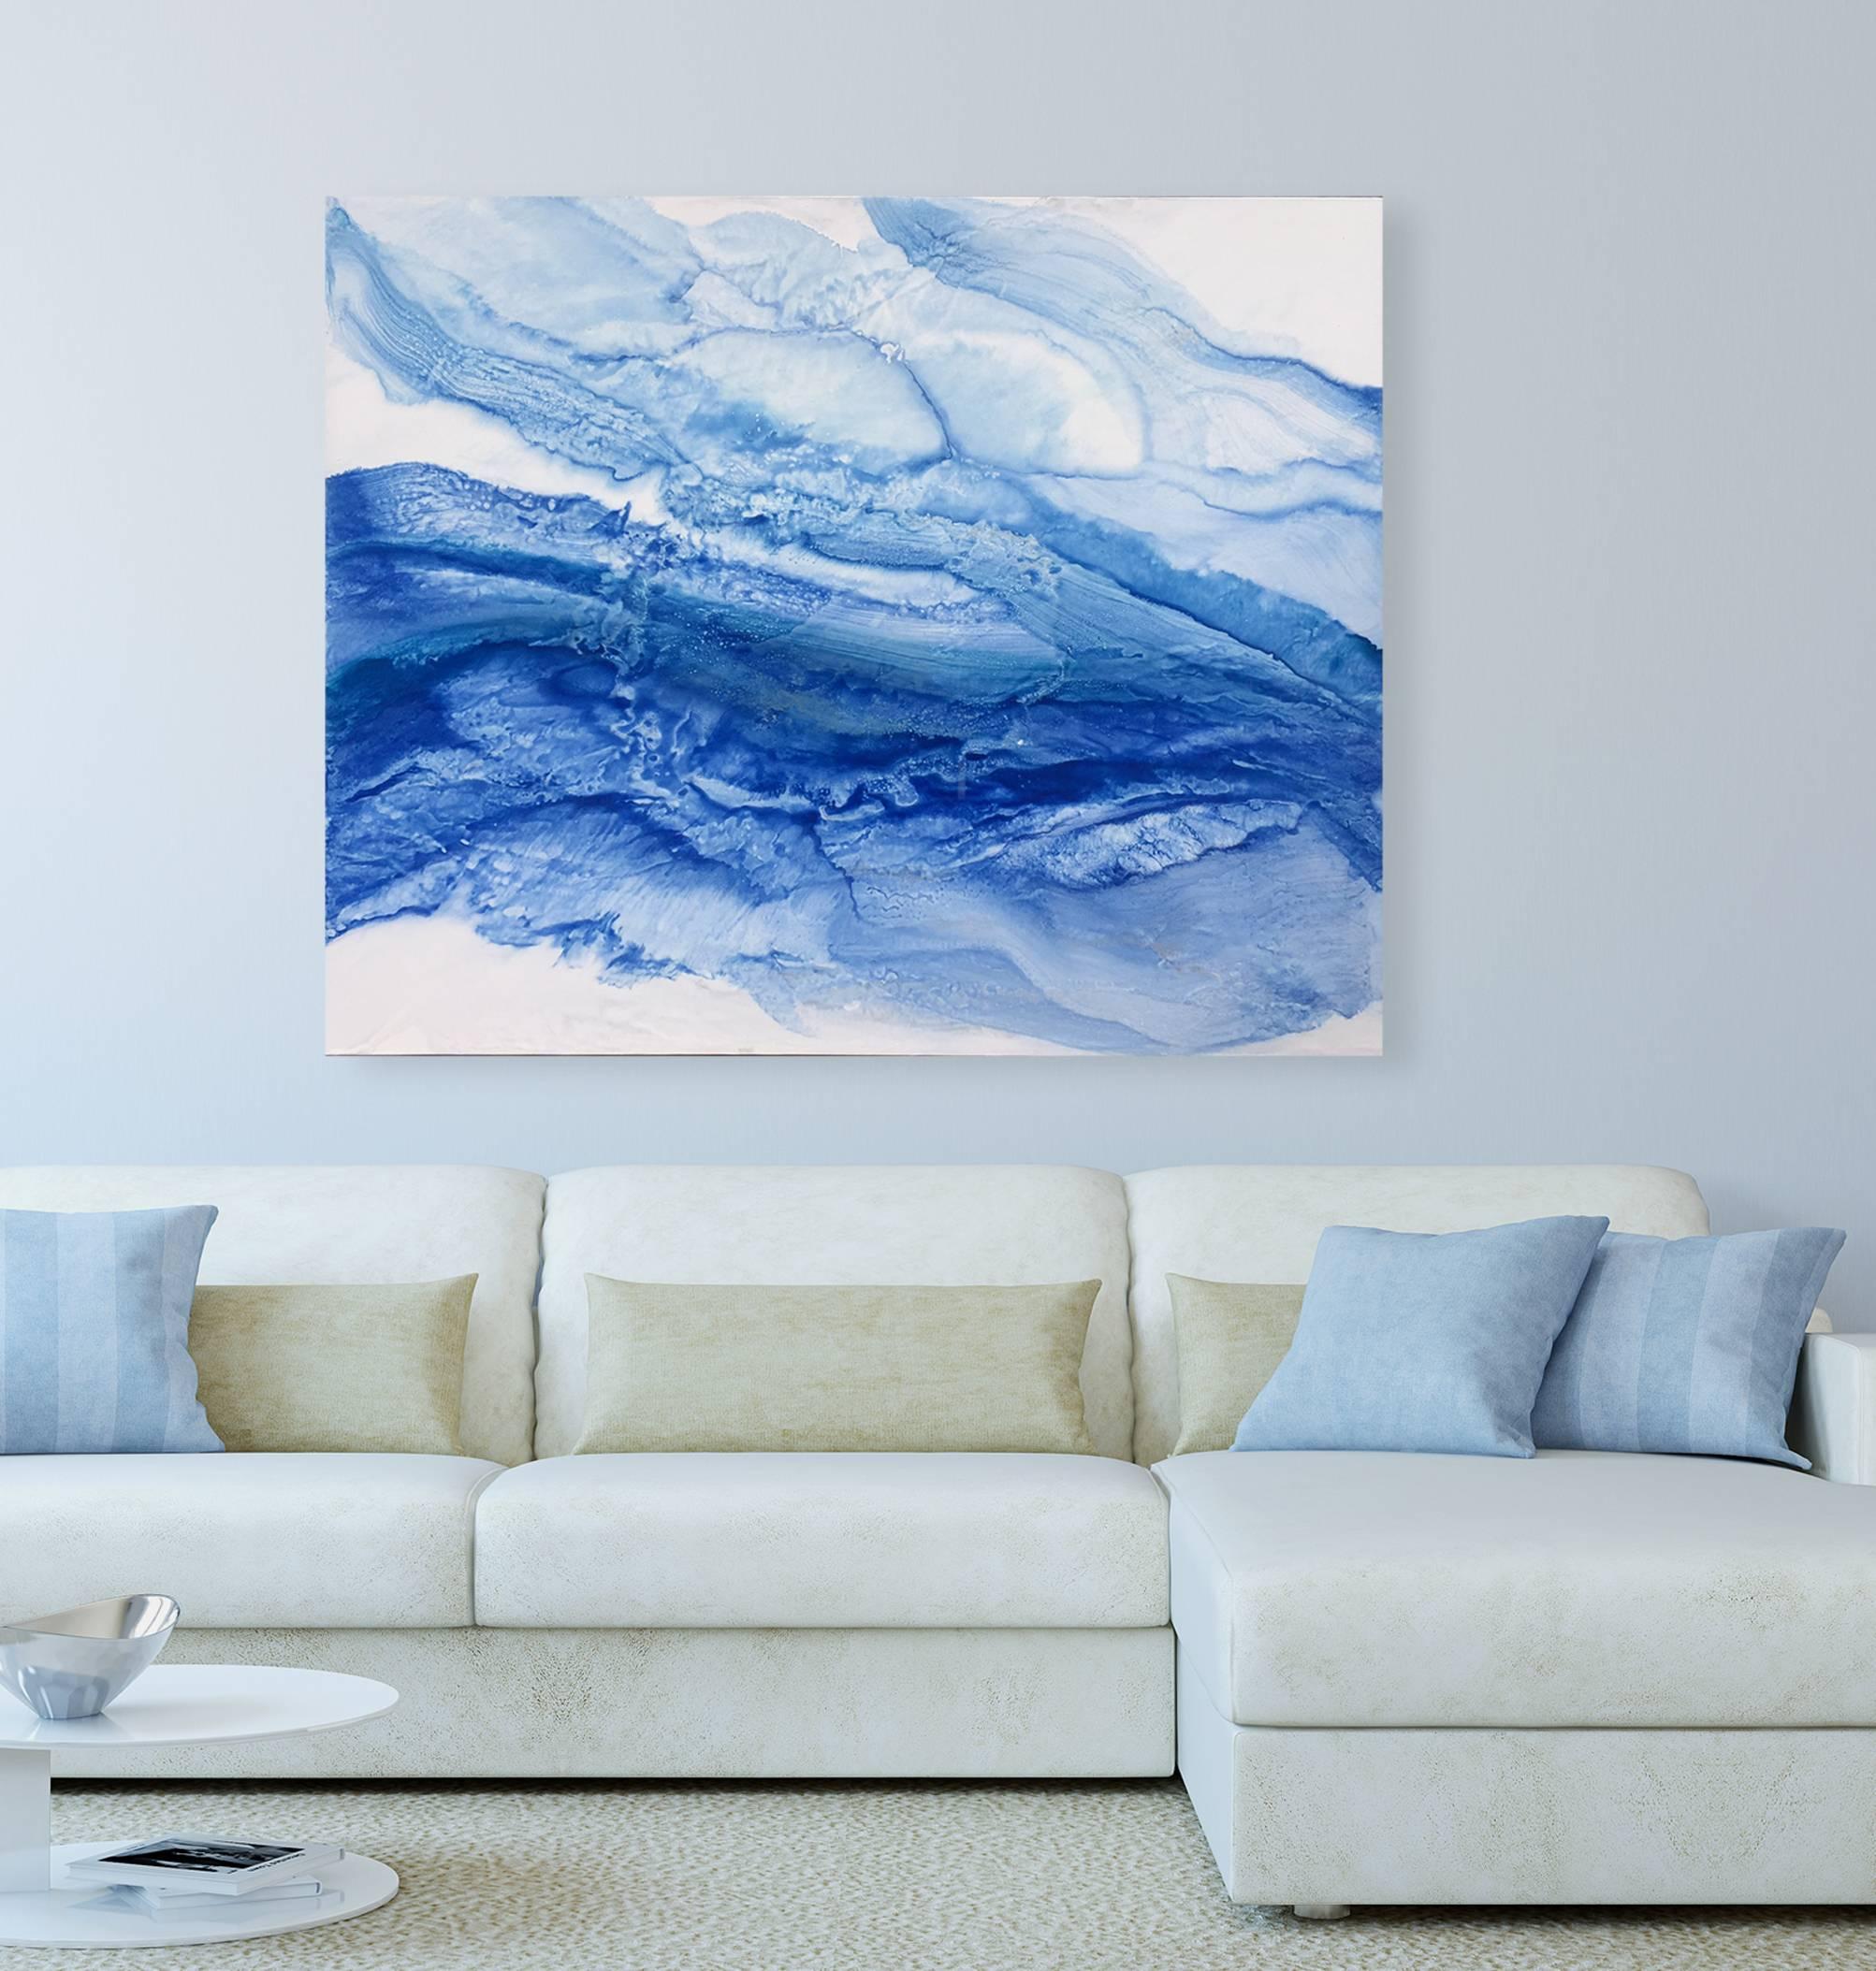 water, wave, sea, ocean, sky, droplets, statement, movement, blue and white, drip, influenced by: Pat Steir

ABOUT TEODORA GUERERRA

BIOGRAPHY
Teodora Guererra received her Bachelor of Arts in Art Education with a minor in Studio Art from Southern